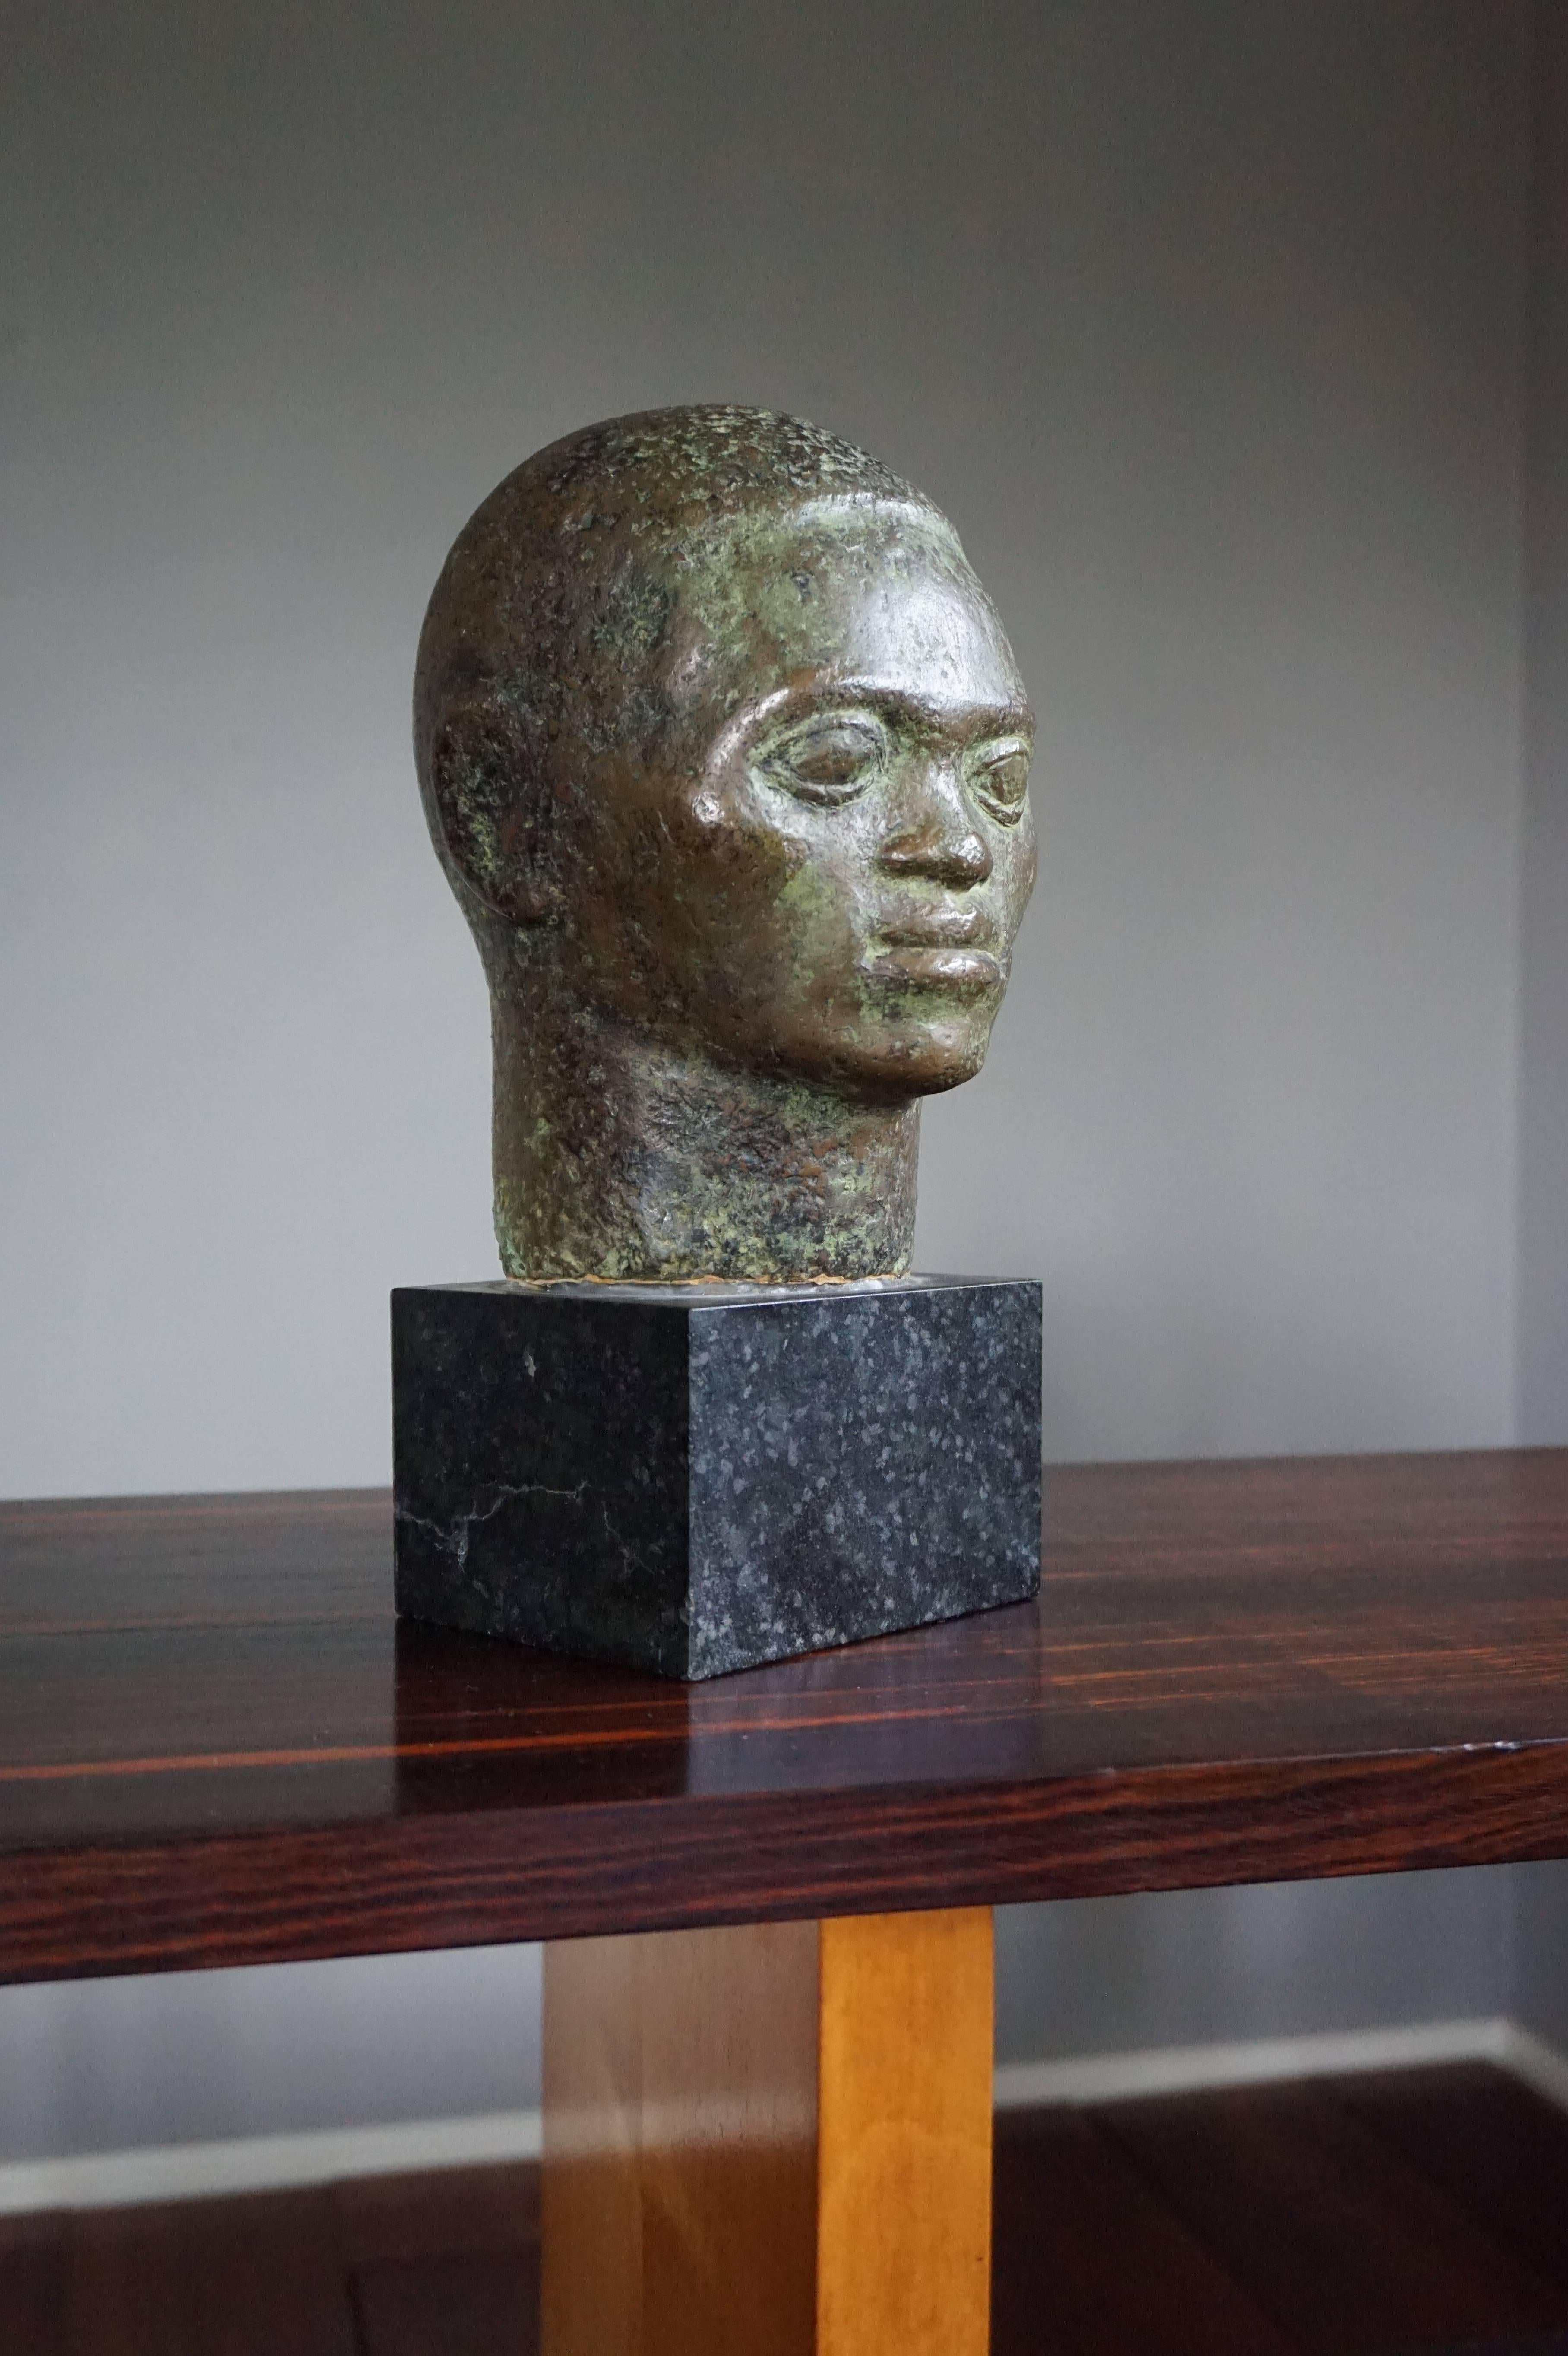 European Small to Mid Size, Rare and Serene African Male Bronze Bust on Black Marble Base